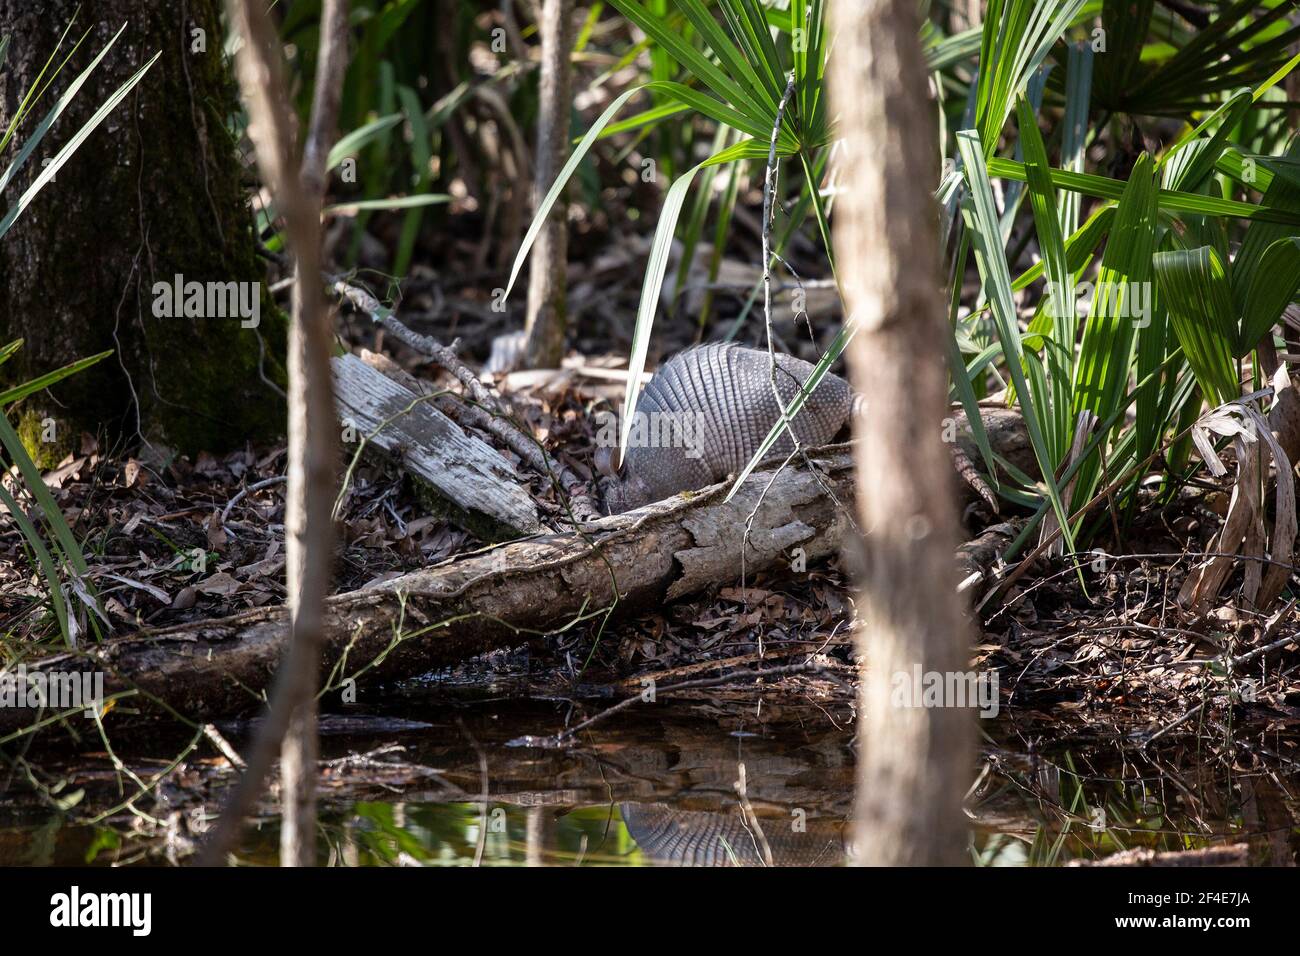 Nine-banded armadillo (Dasypus novemcinctus) foraging for insects under a fallen limb near a stream Stock Photo